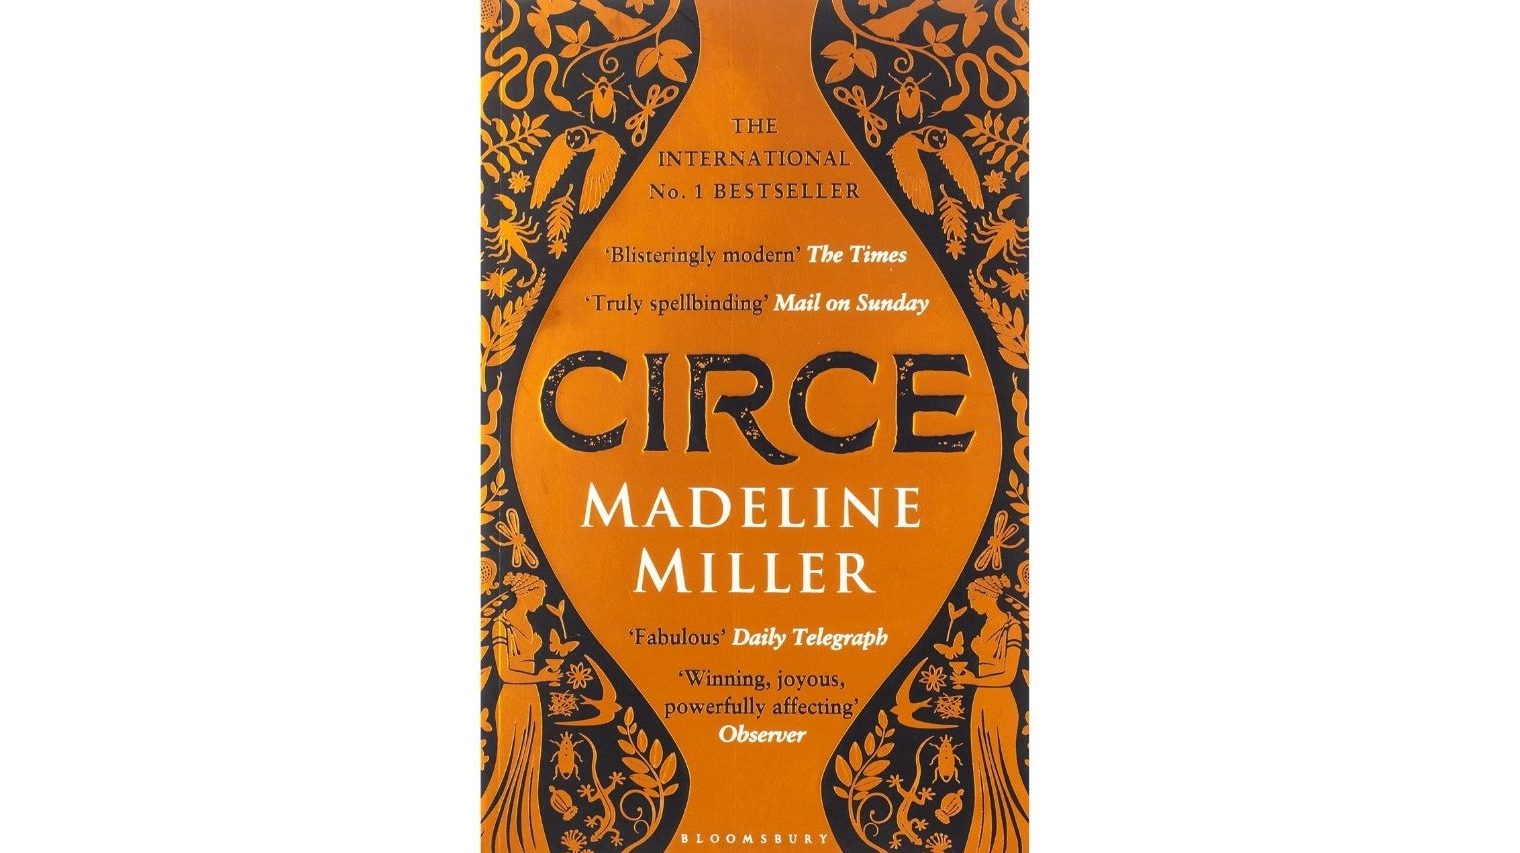 Circe by Madeline Miller is a feminist retelling to enjoy if you loved Song of Achilles' LGBT story